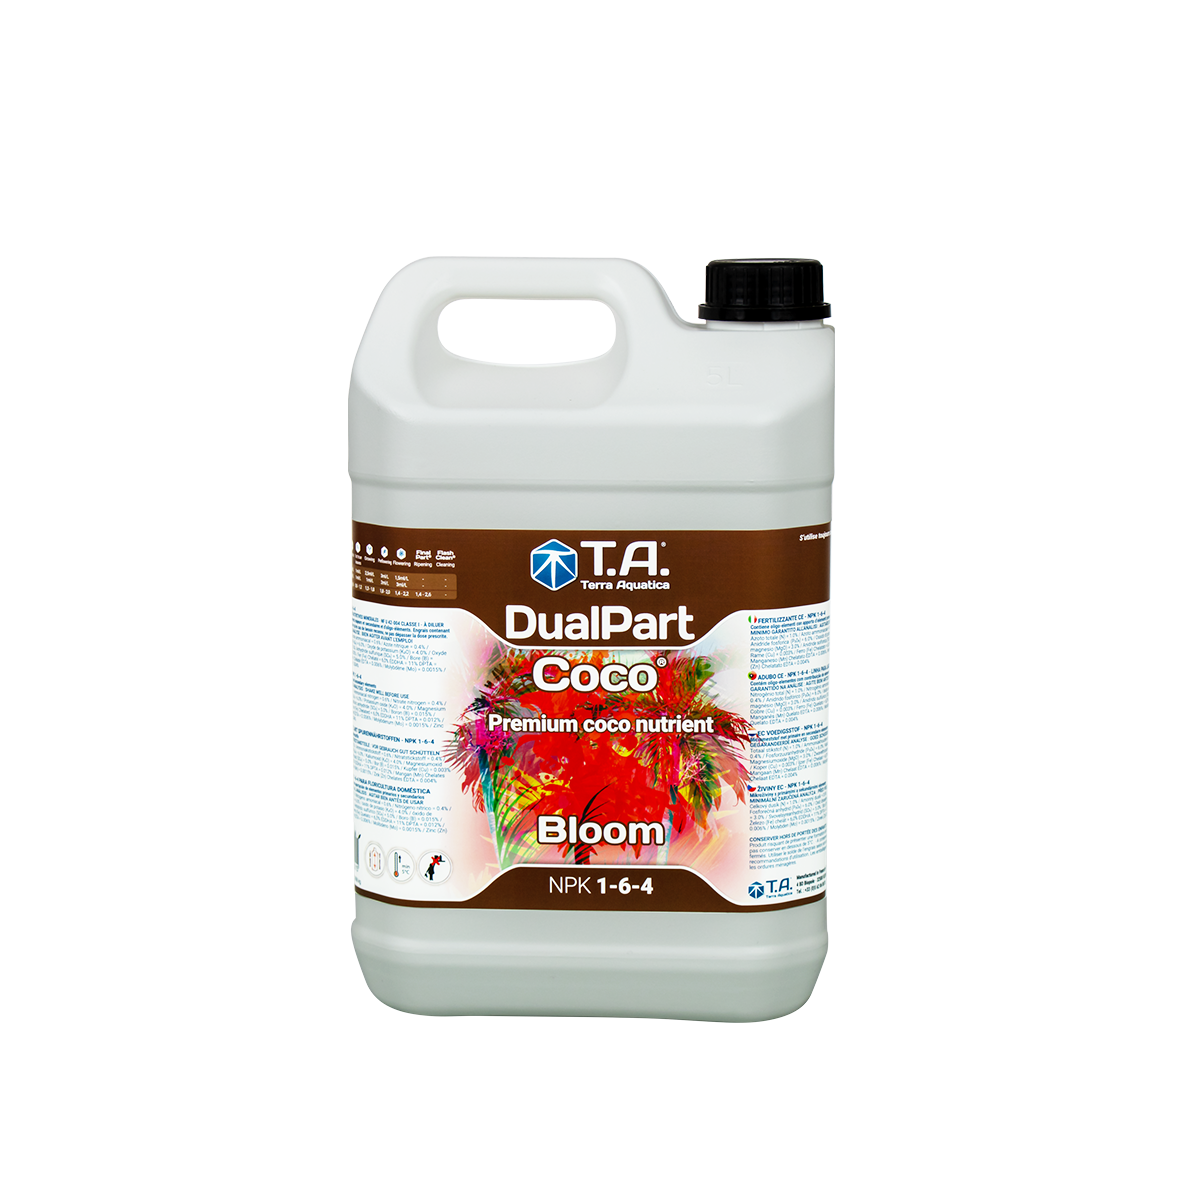 Dualpart coco bloom 5 litres